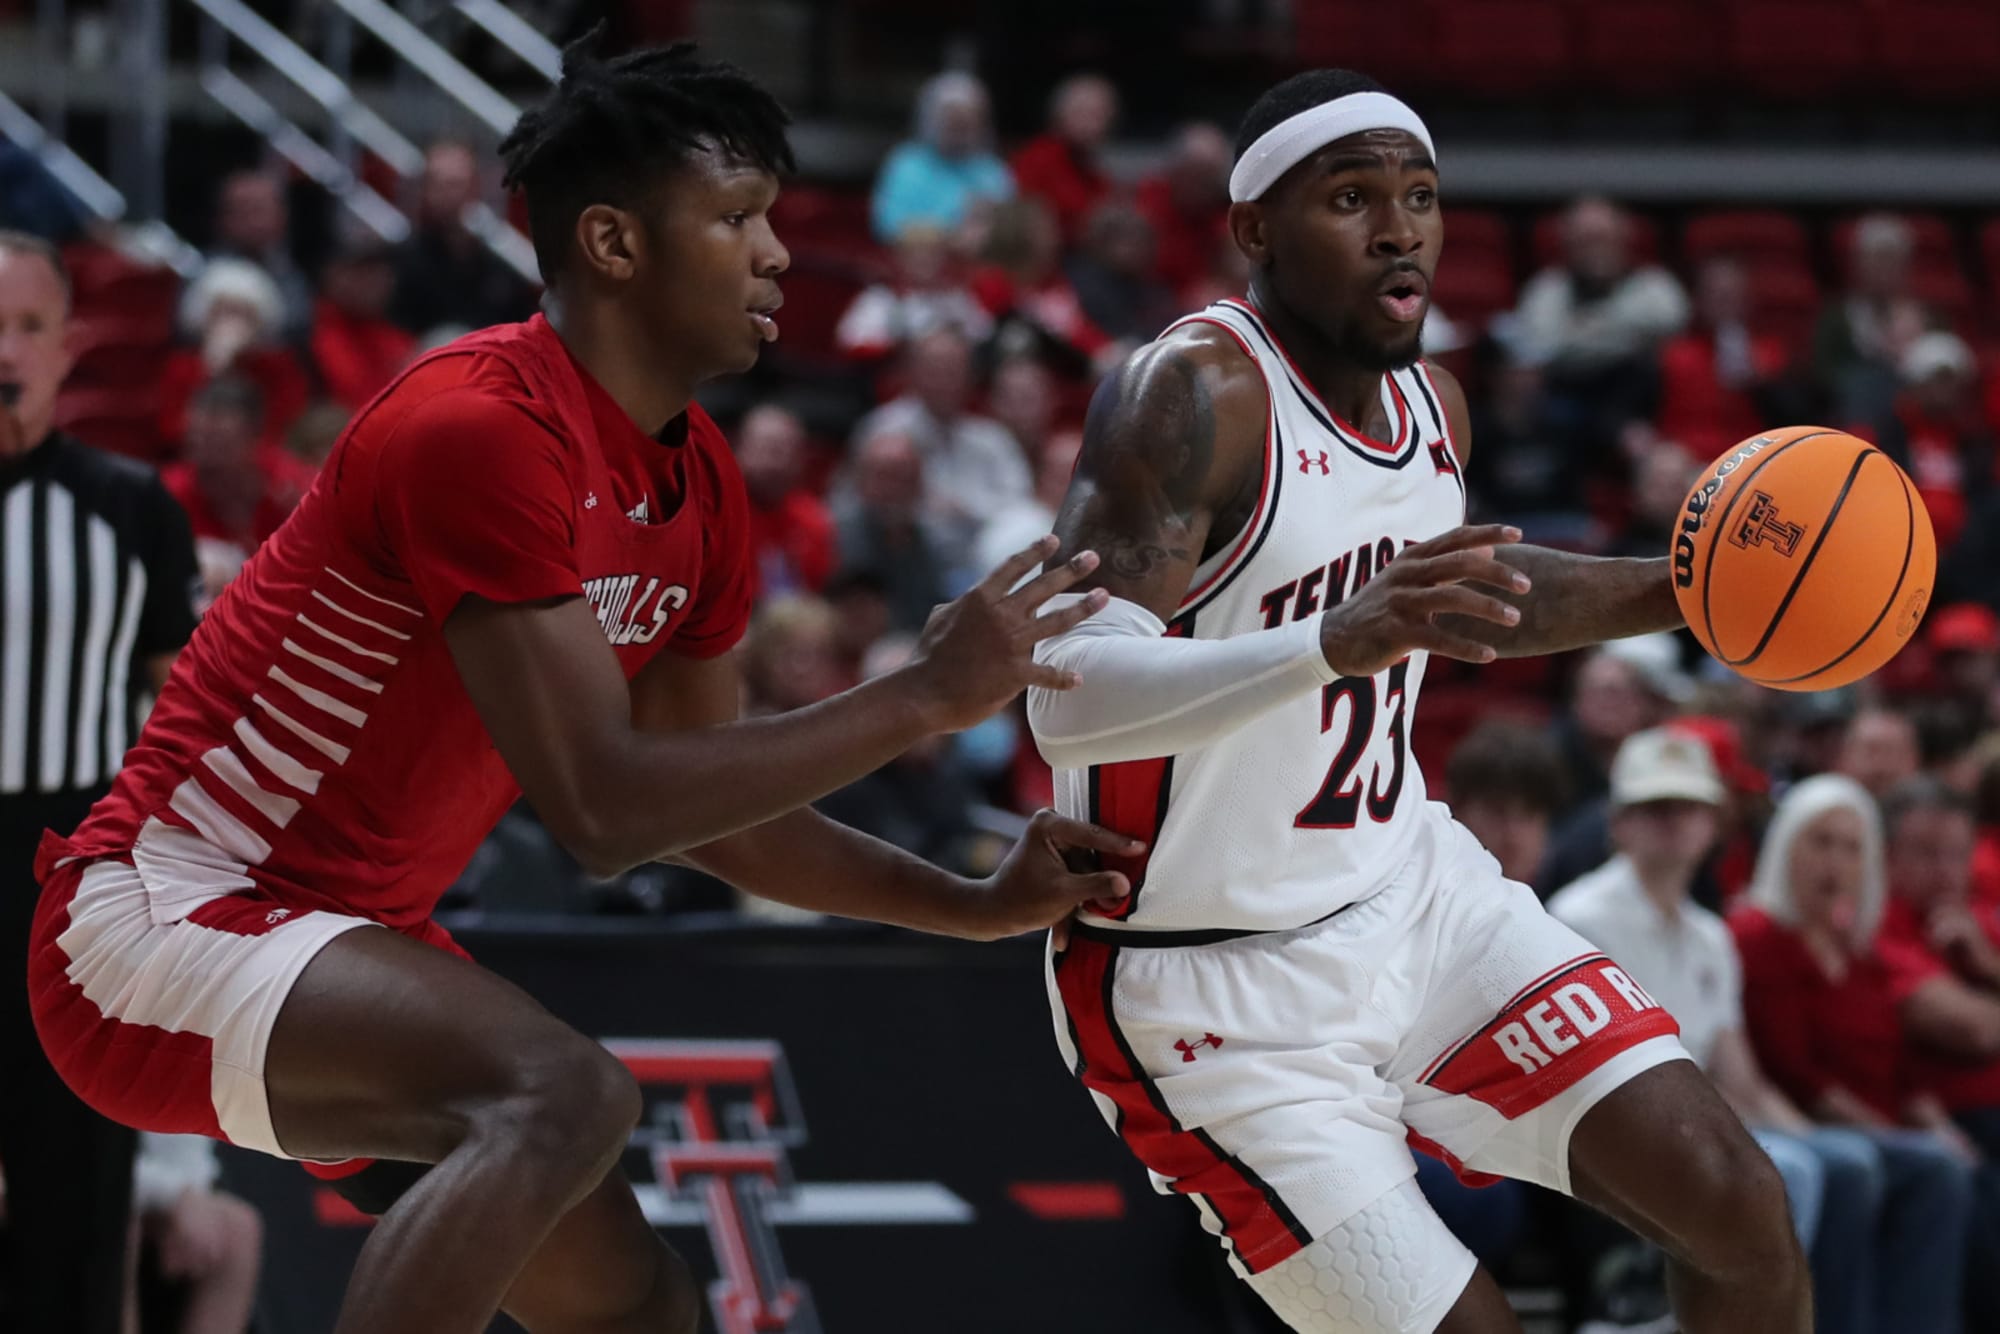 Texas Tech basketball: It may be time to worry about this season’s Red Raiders